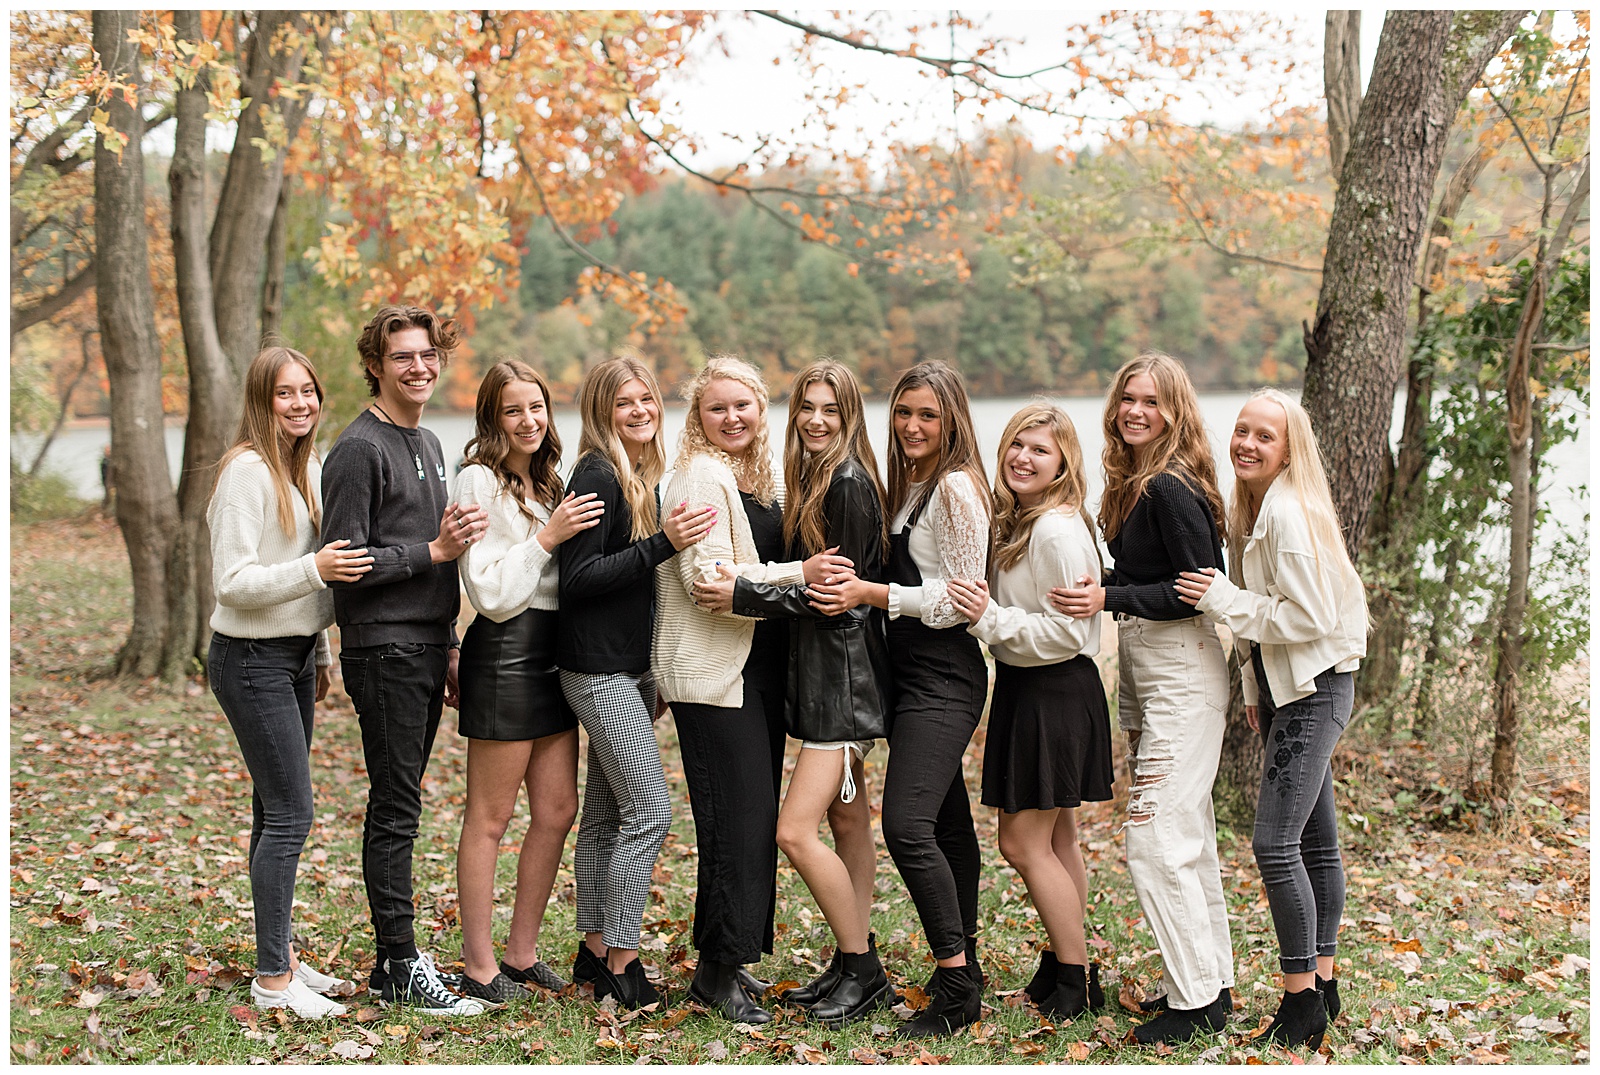 ten senior spokesmodels all wearing variations of black and ivory outfits standing close and smiling at camera at reservoir park